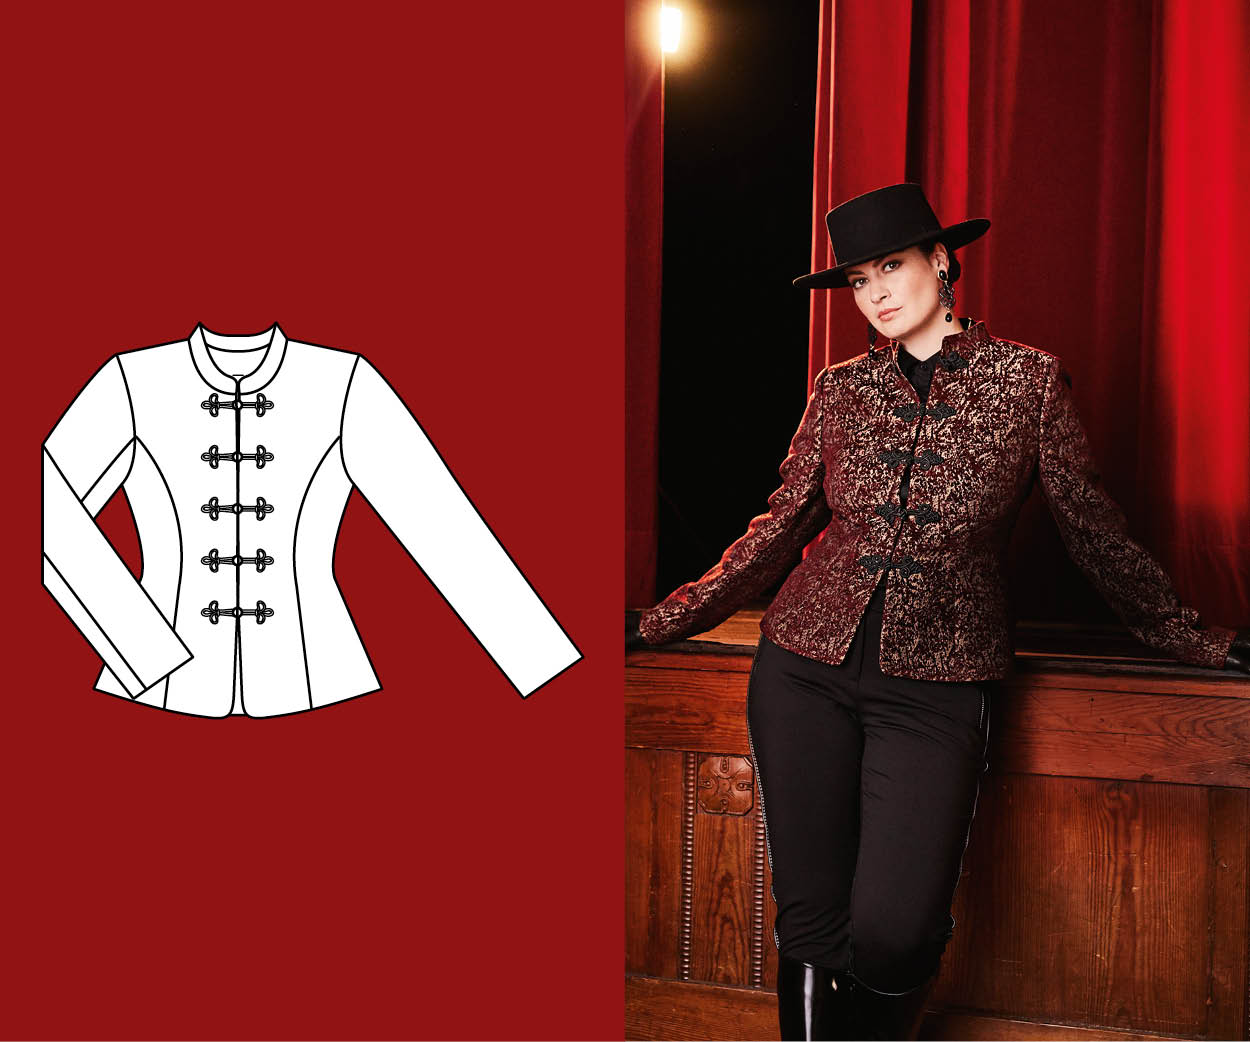 Jacket 101: A touch of flamenco in trimmings.